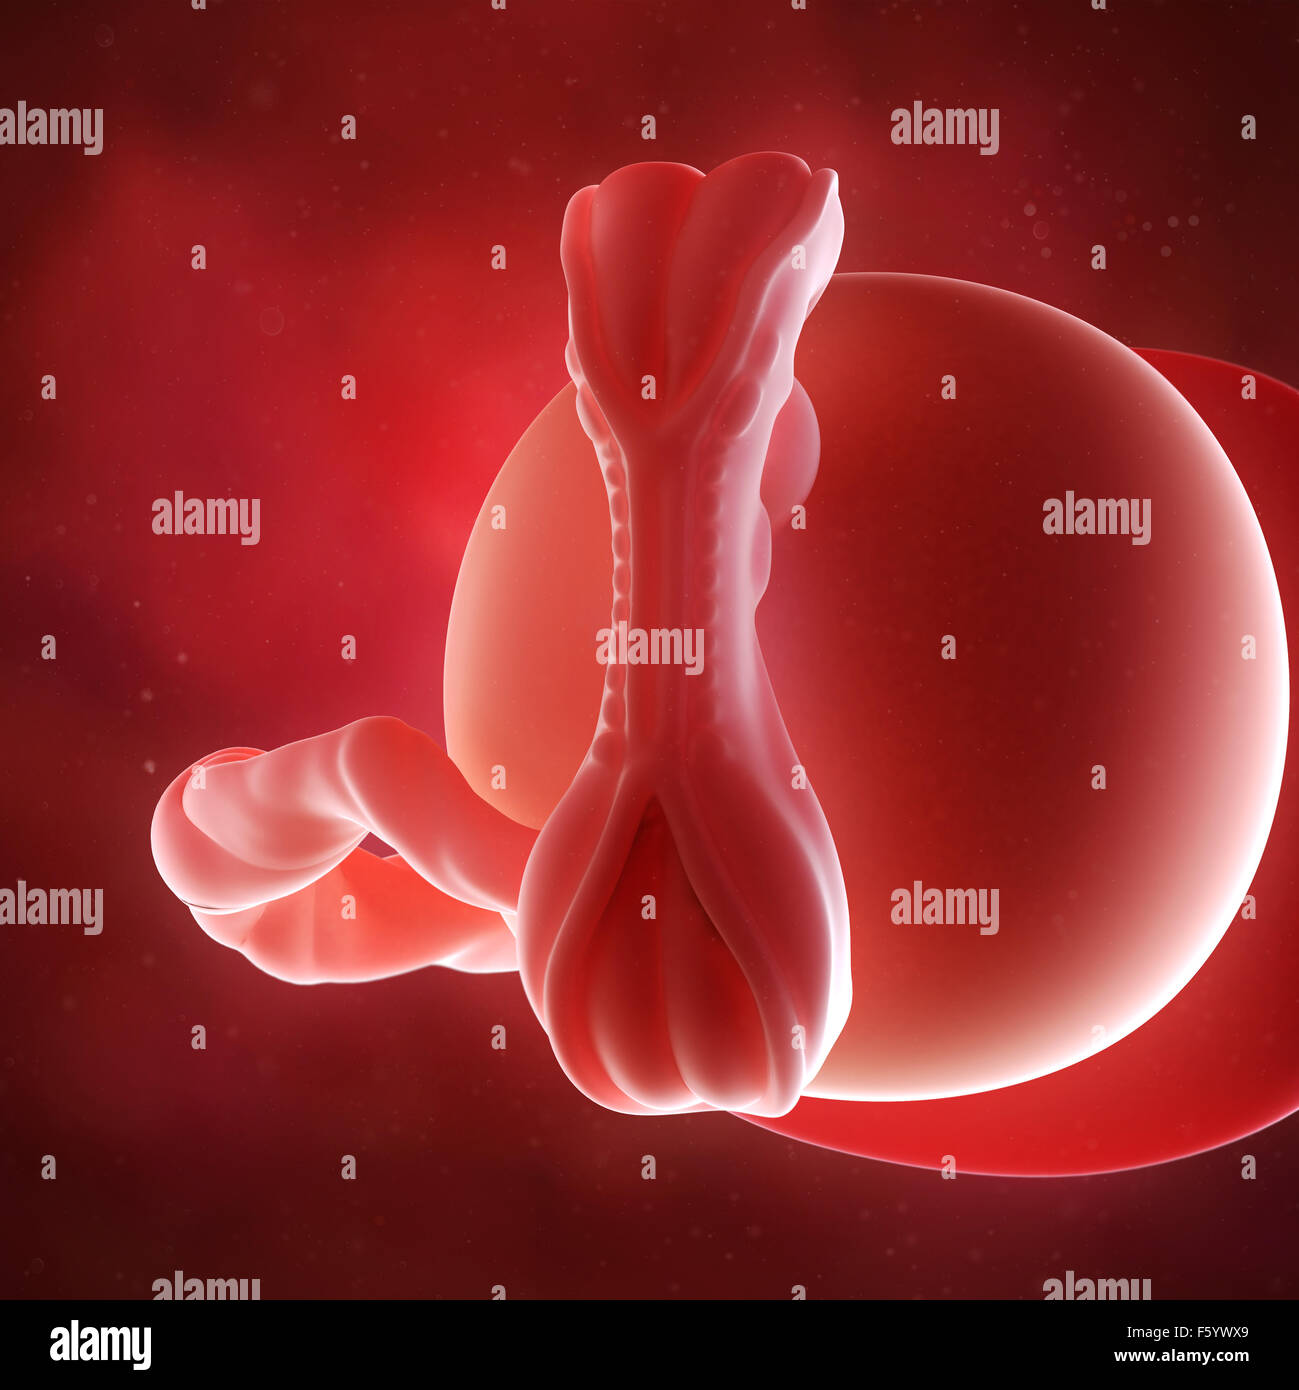 medical accurate 3d illustration of a fetus week 5 Stock Photo